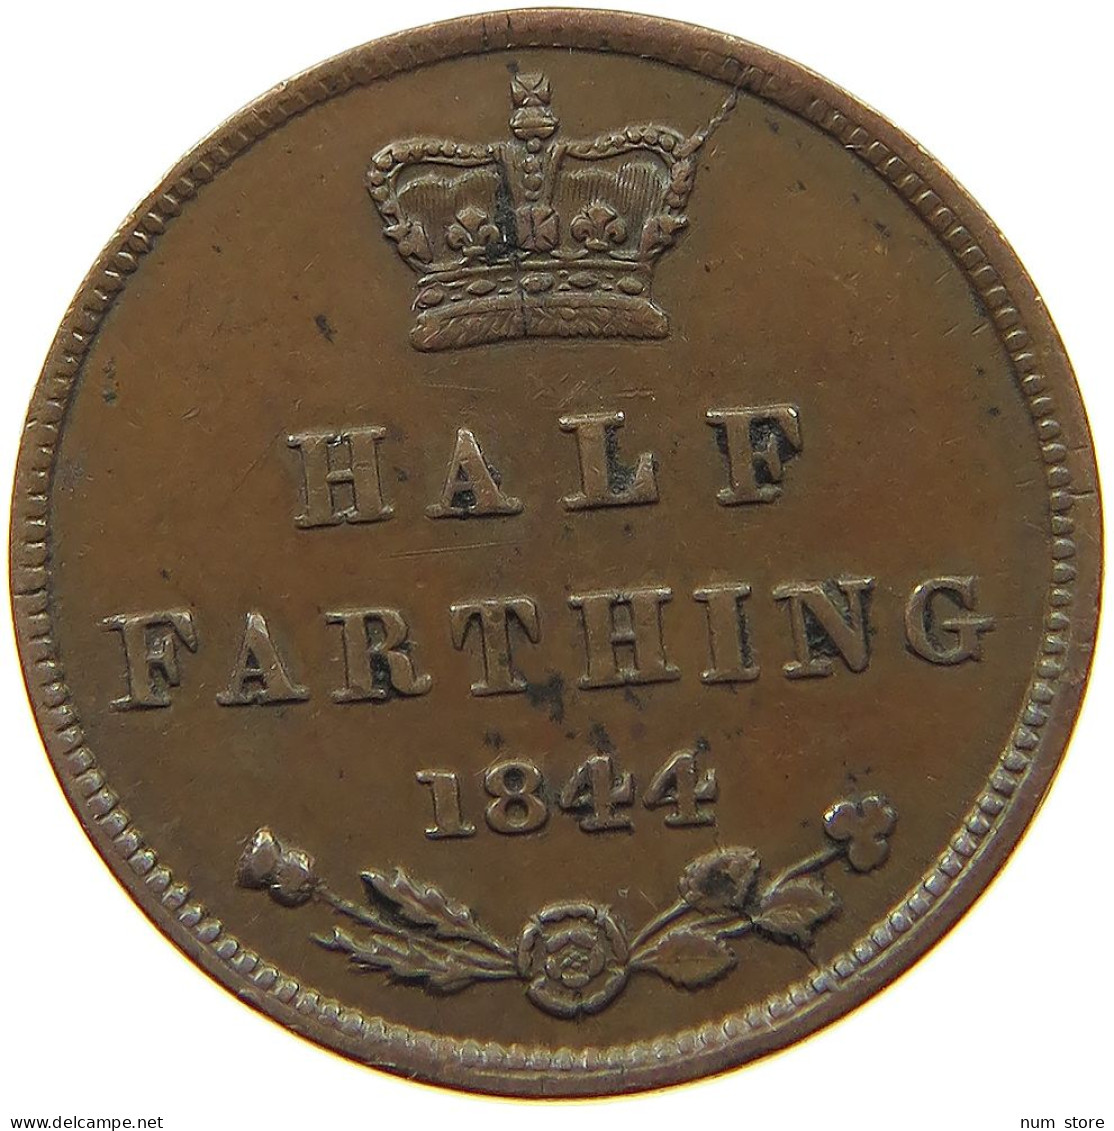 GREAT BRITAIN HALF FARTHING 1844 Victoria 1837-1901 #t100 0207 - A. 1/4 - 1/3 - 1/2 Farthing